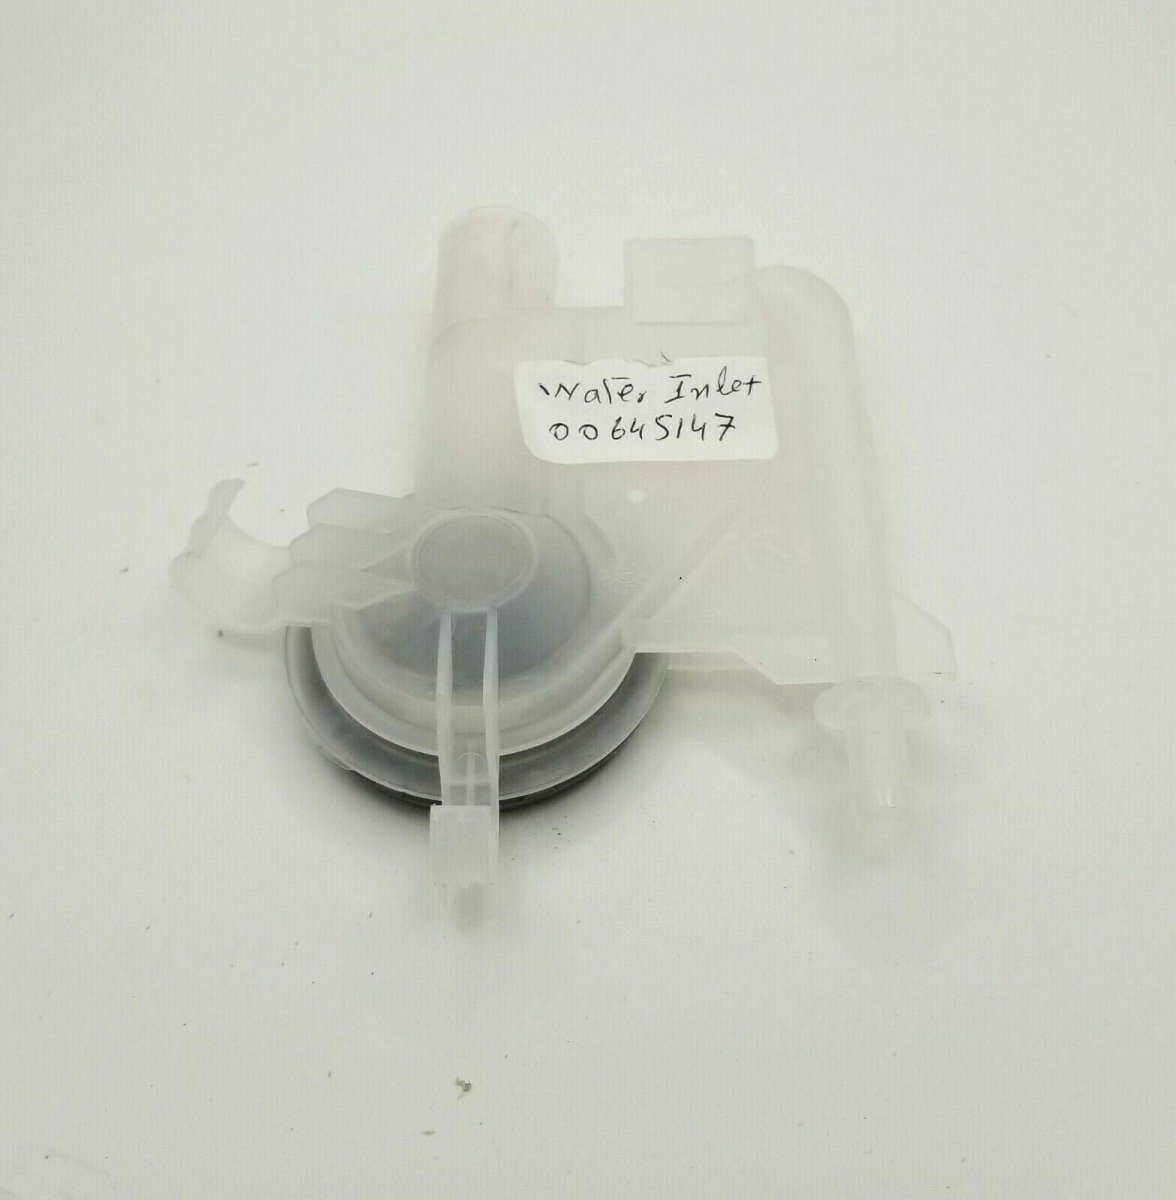 00645147 - 00634765 Bosch Dishwasher Water Inlet / Cover AP4339677, PS8730292 - ApplianceSolutionsHub